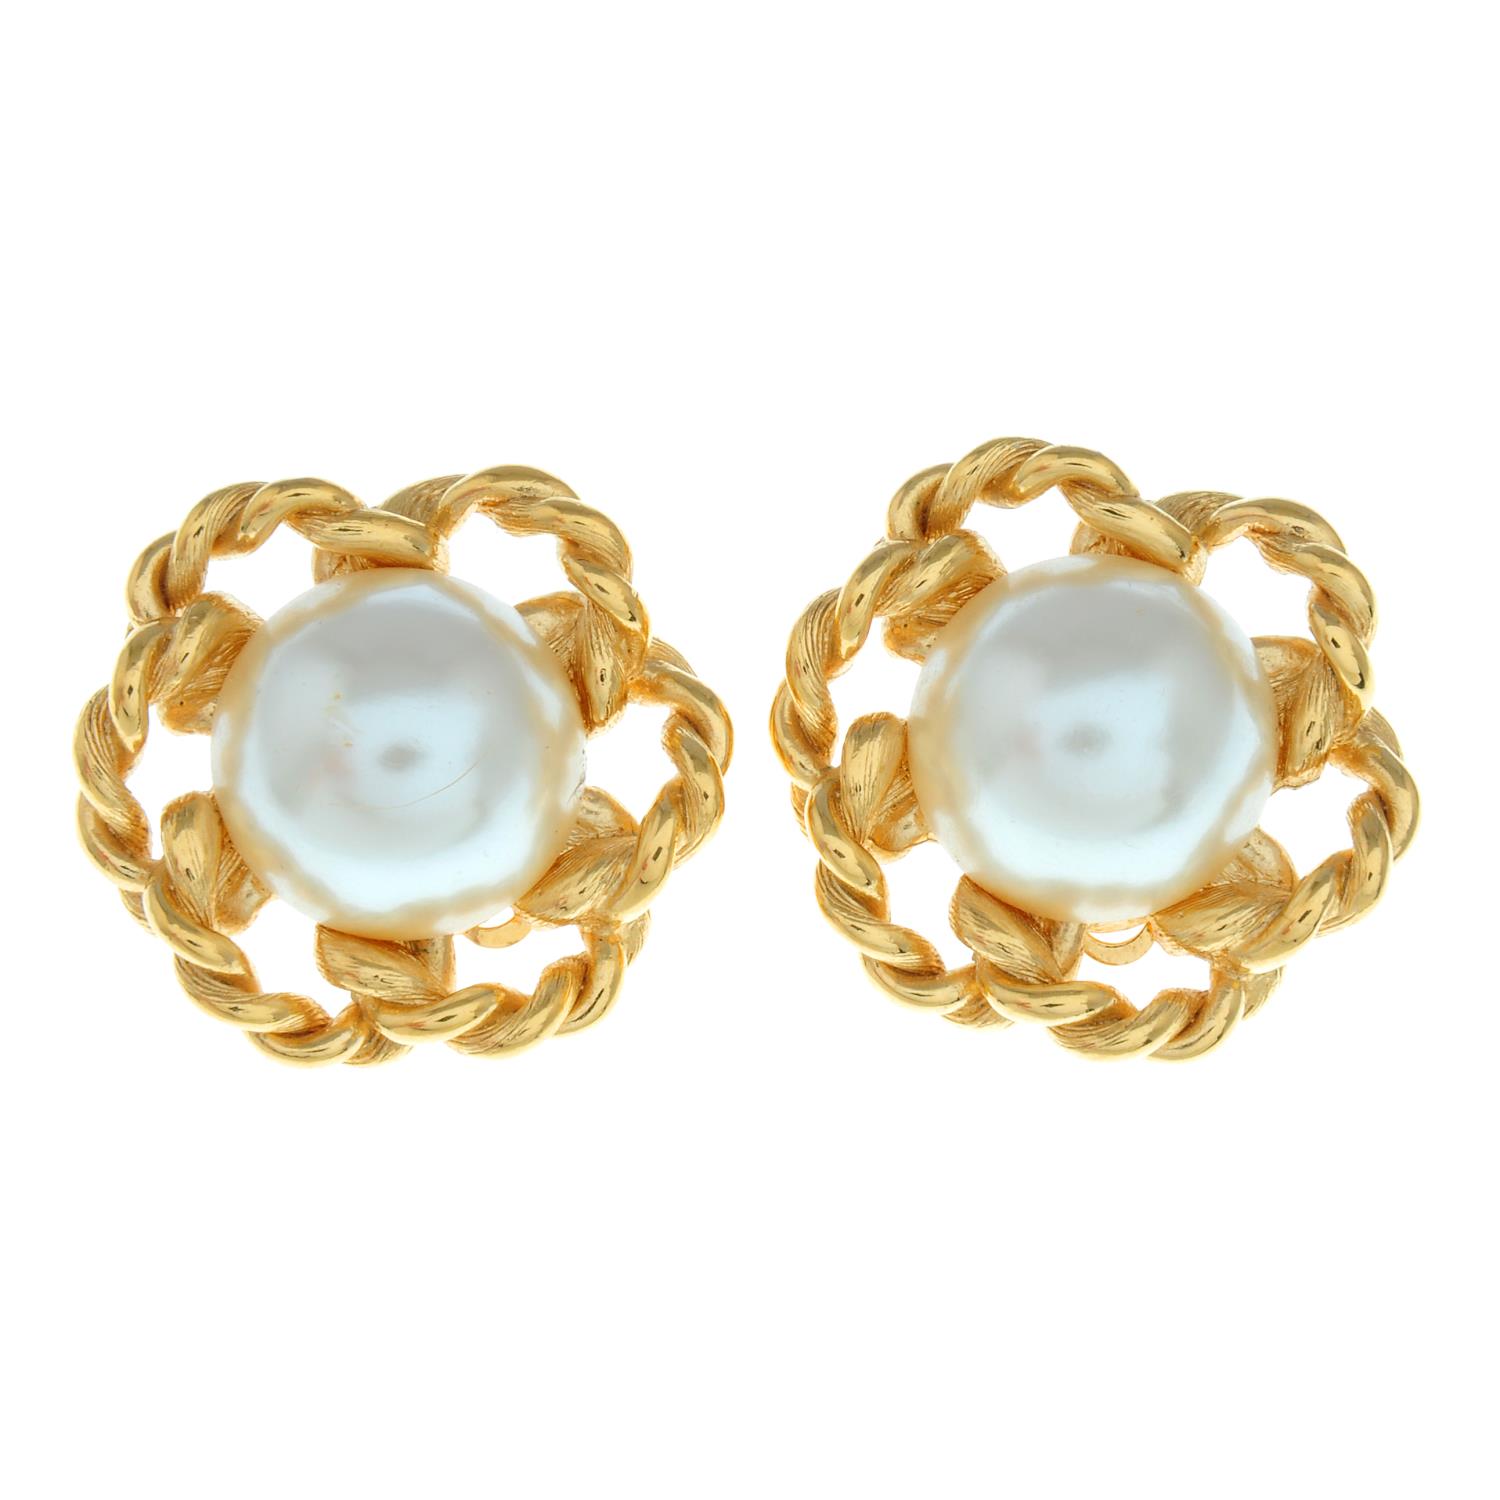 A pair of imitation pearl clip-on earrings with a rope textured floral surround,